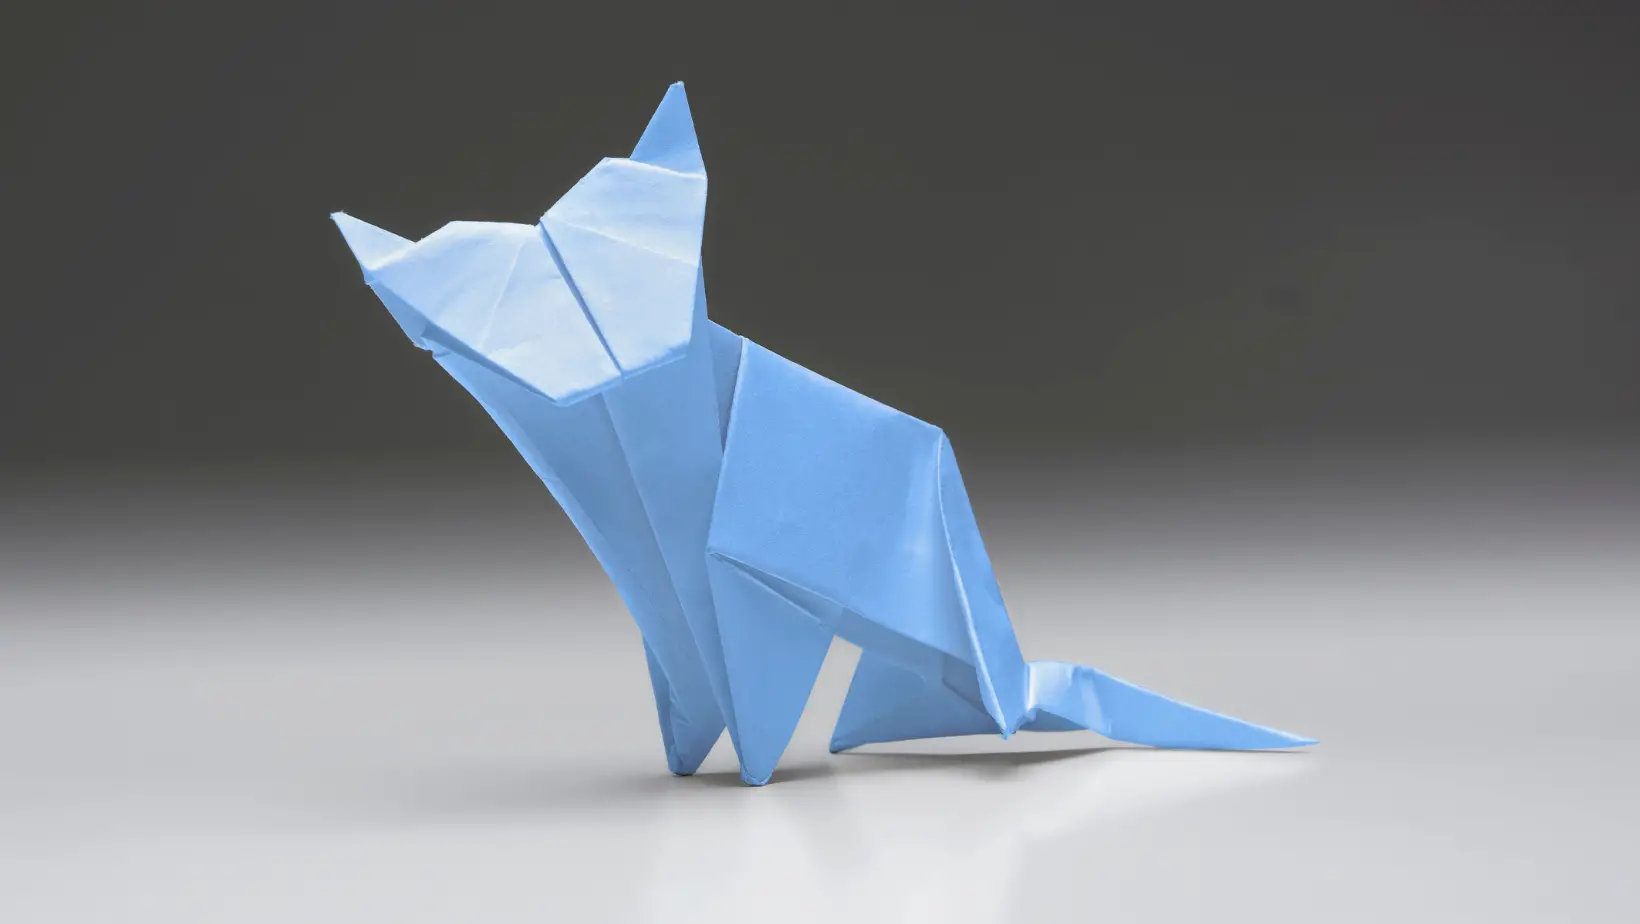 How to Make a Origami Cat?